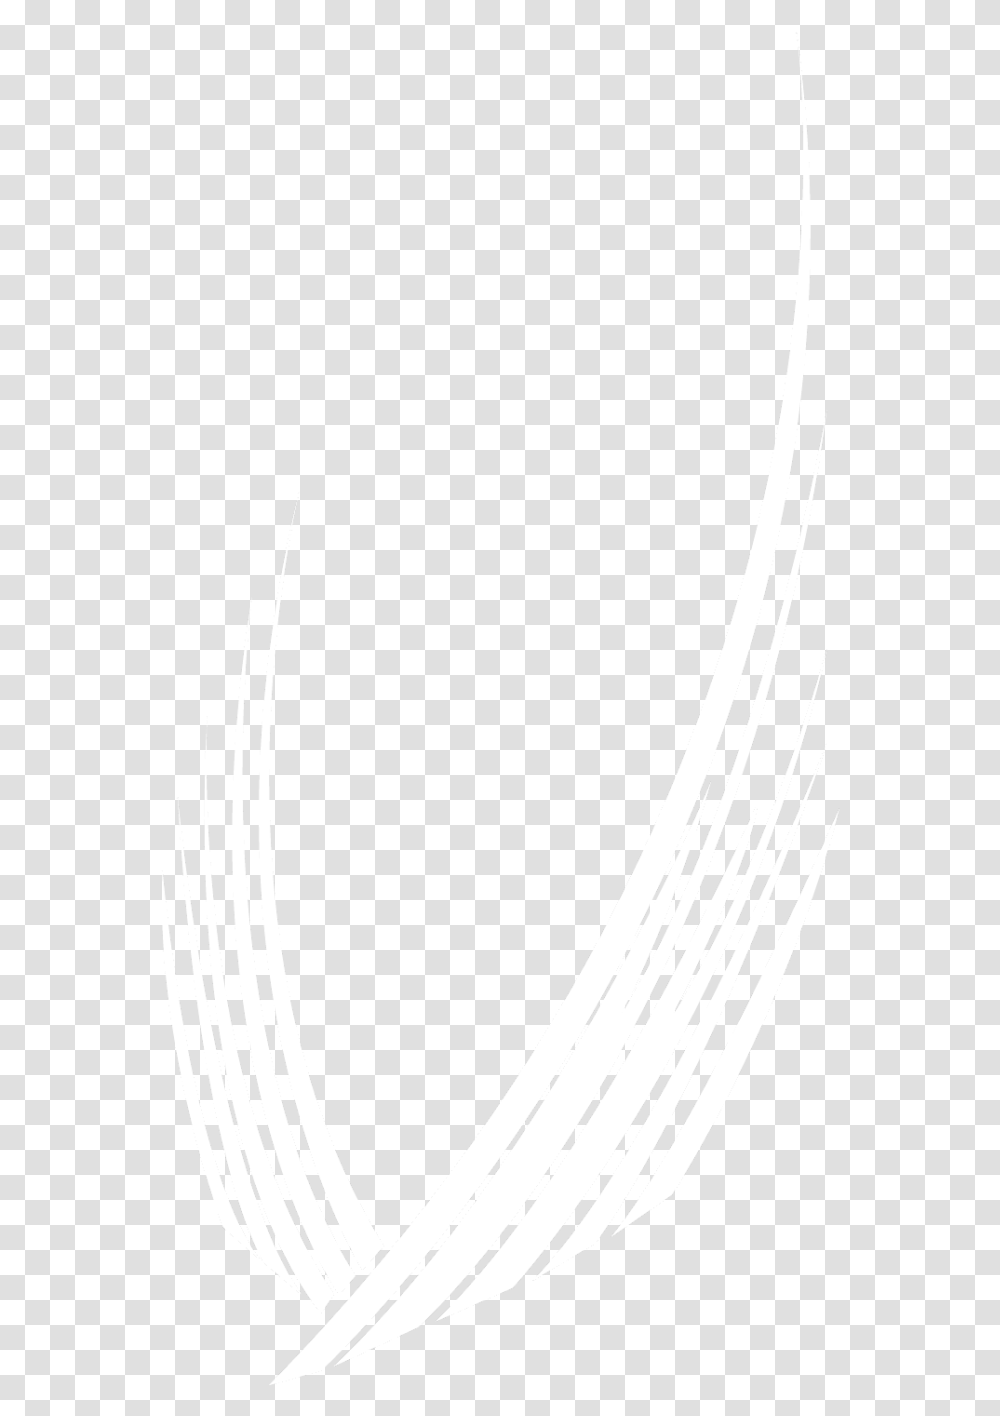 Format Twitter Logo White Circle, Building, Architecture, Armor, Cutlery Transparent Png